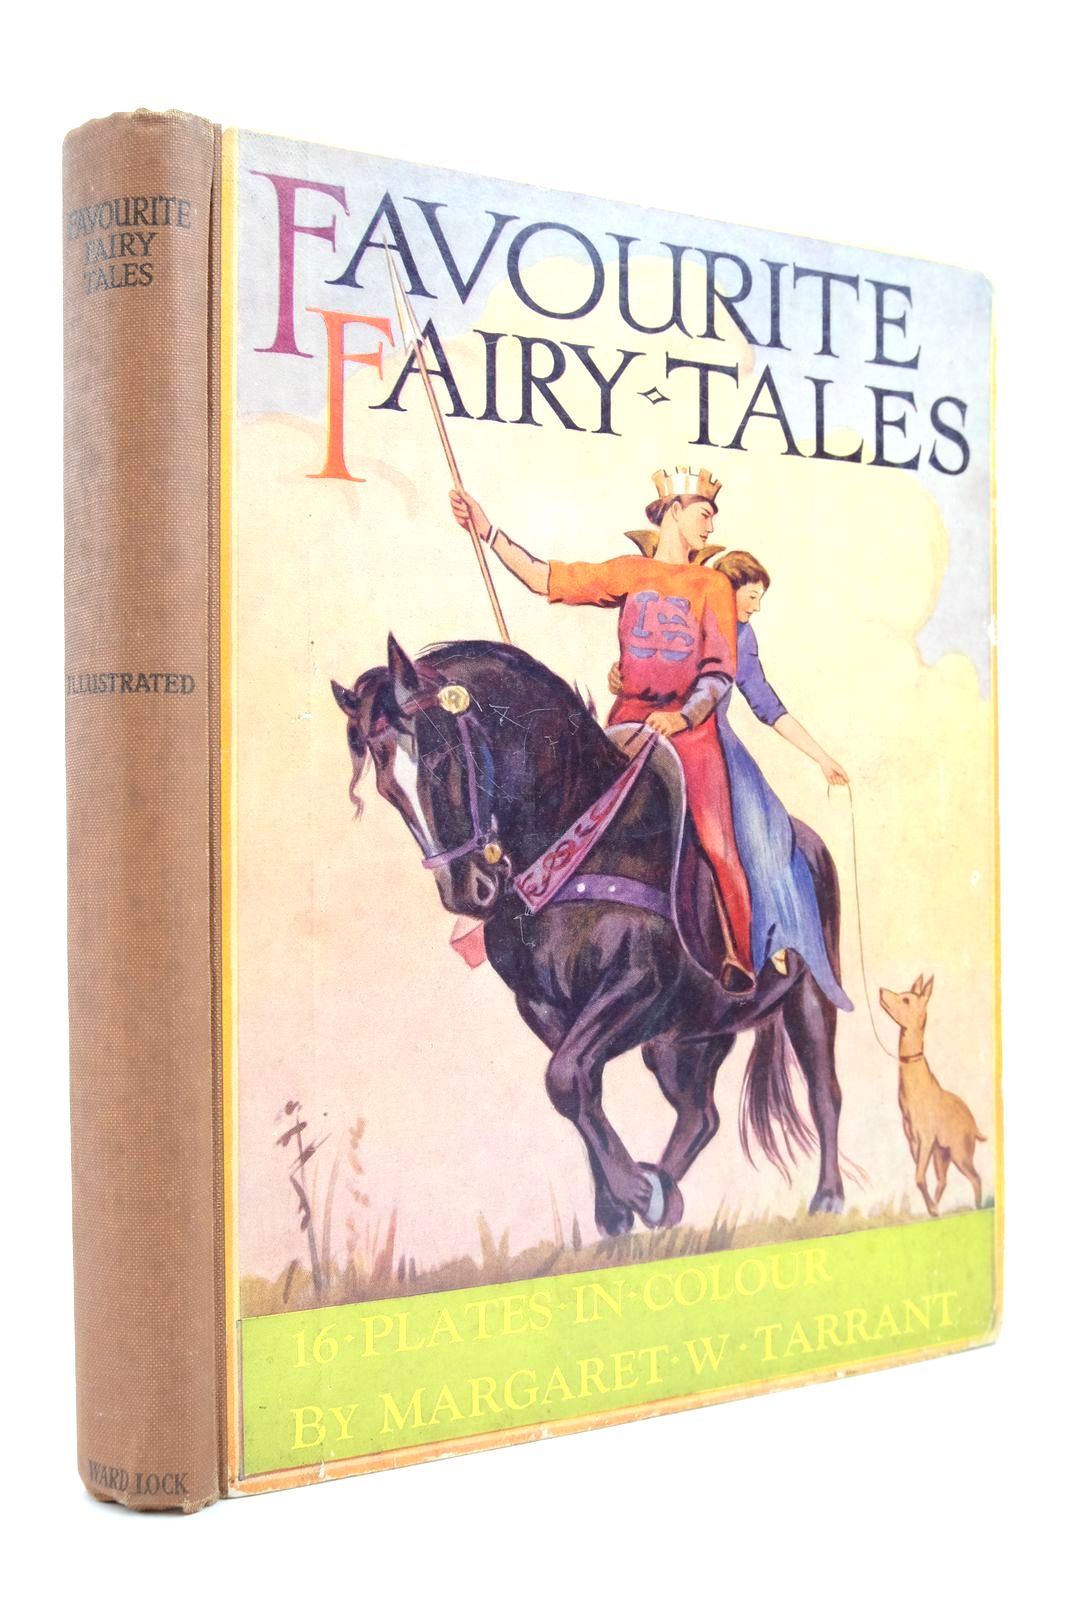 Photo of FAVOURITE FAIRY TALES illustrated by Tarrant, Margaret published by Ward, Lock & Co. Ltd. (STOCK CODE: 2140187)  for sale by Stella & Rose's Books